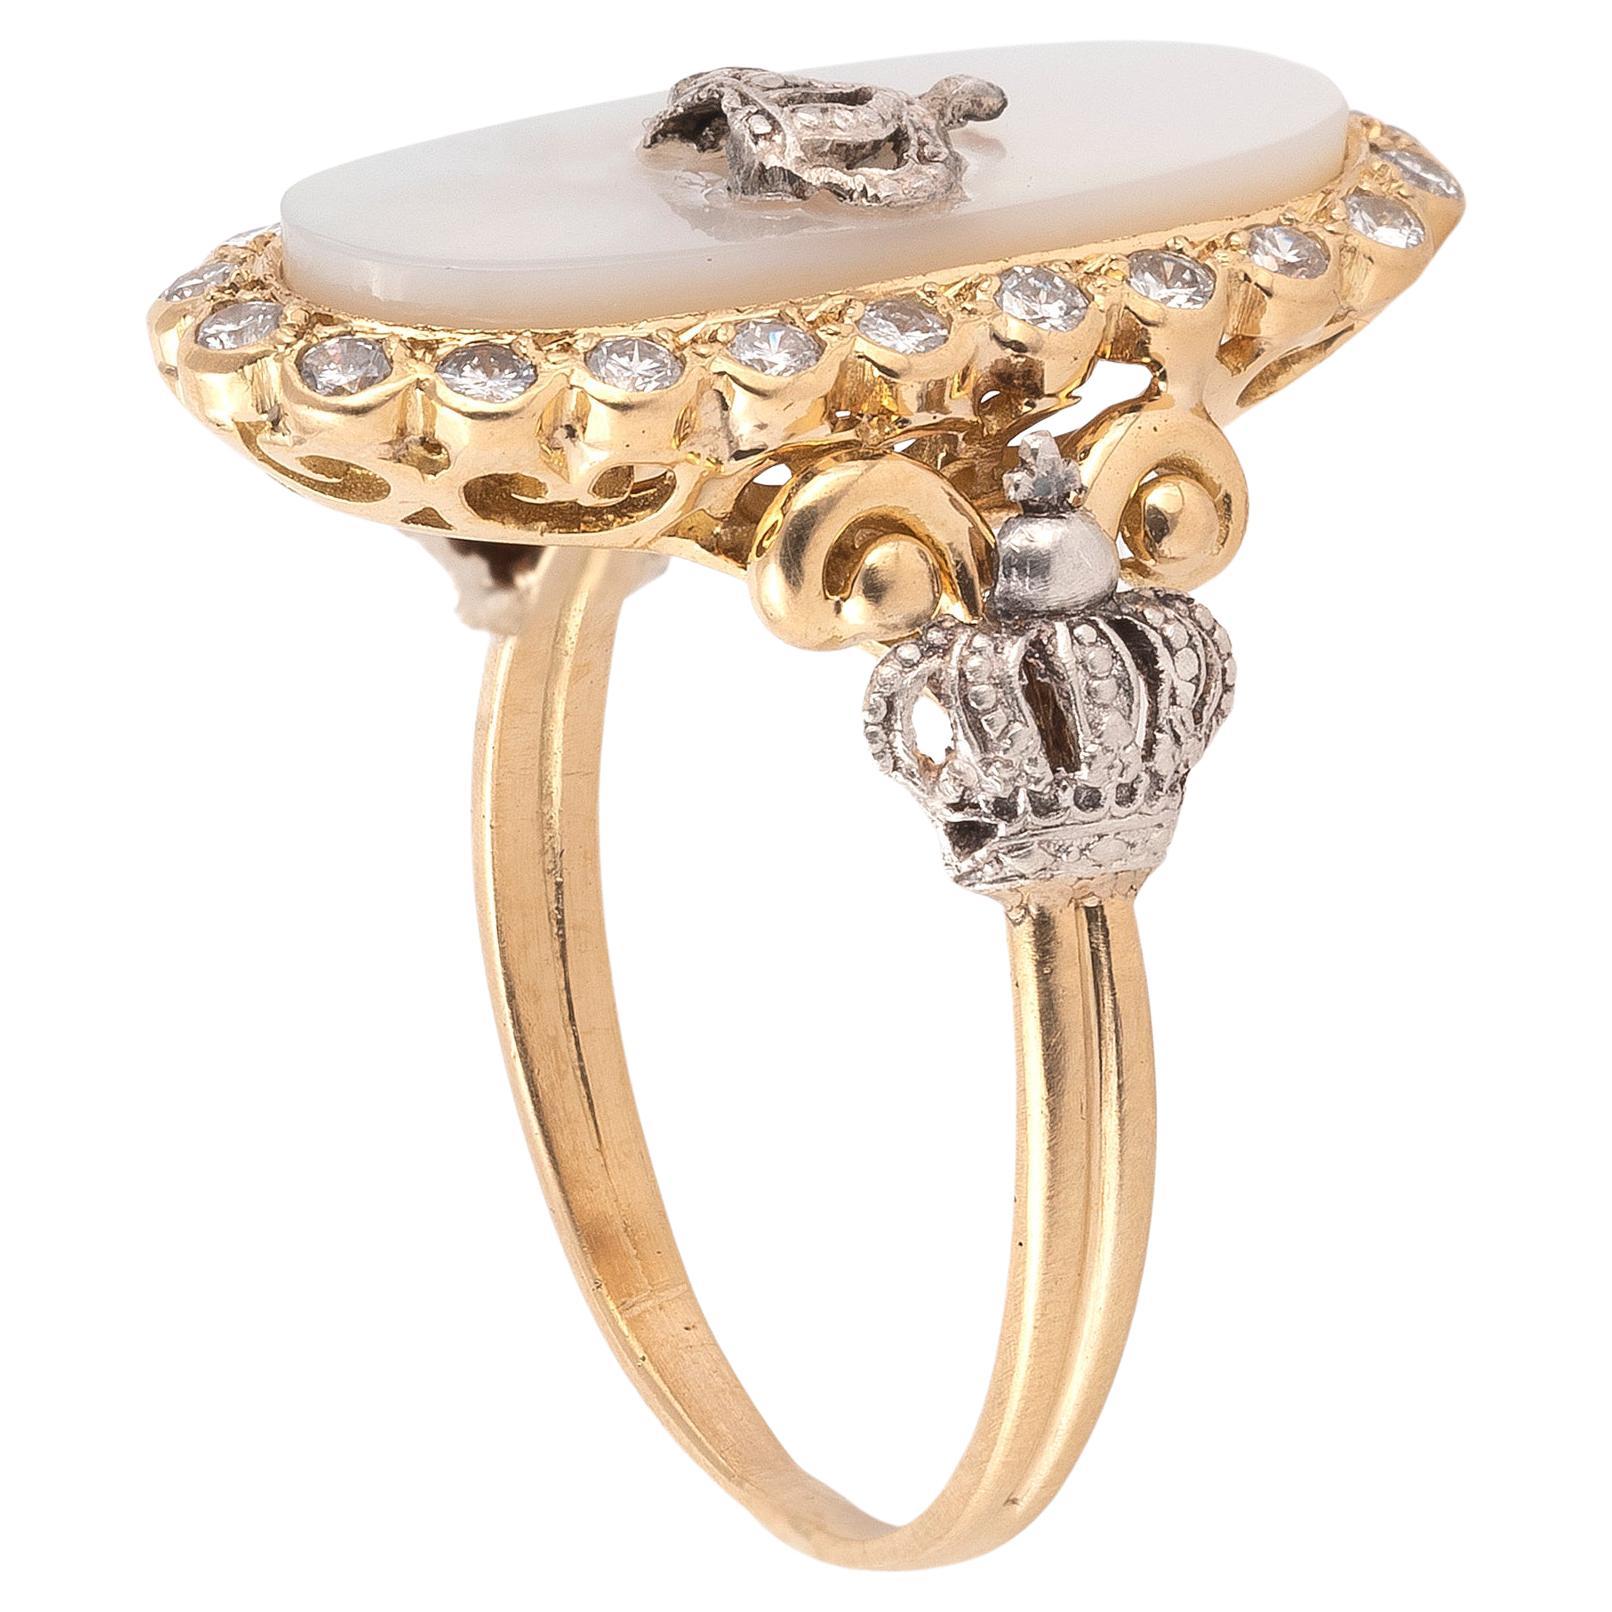 

Yellow gold ring, adorned with an oval MOP plaque set with a royal silver crown surrounded by brilliant cut diamonds. The frame uses the motifs of crowns. Ring size: 7 1/2. 
Weight: 6.3g 